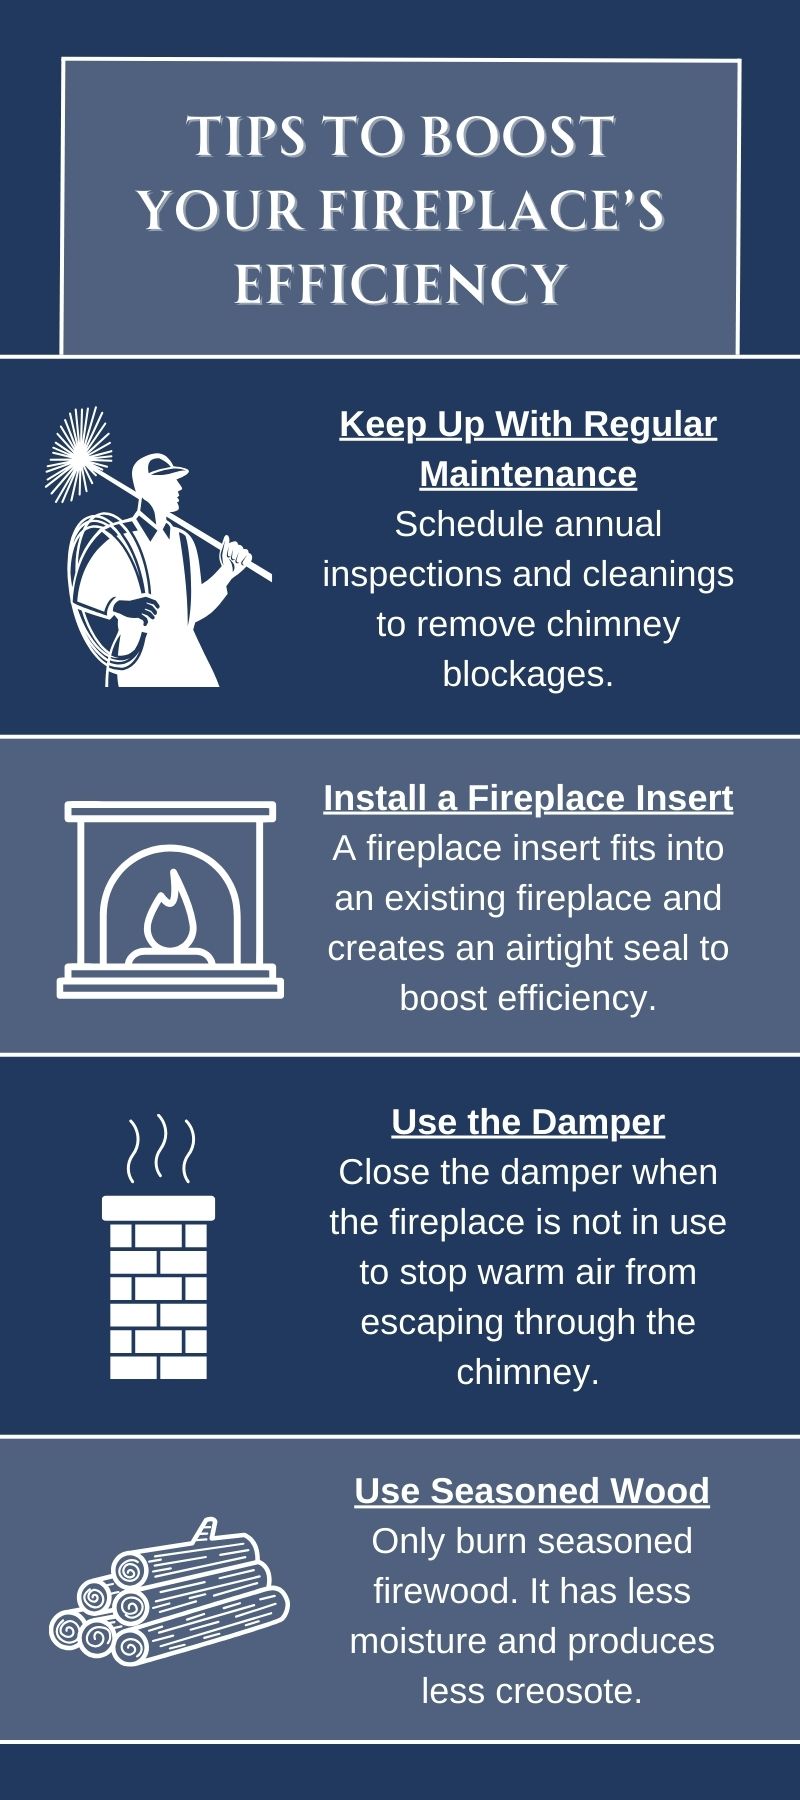 original infographic showing tips for boosting fireplace efficiency